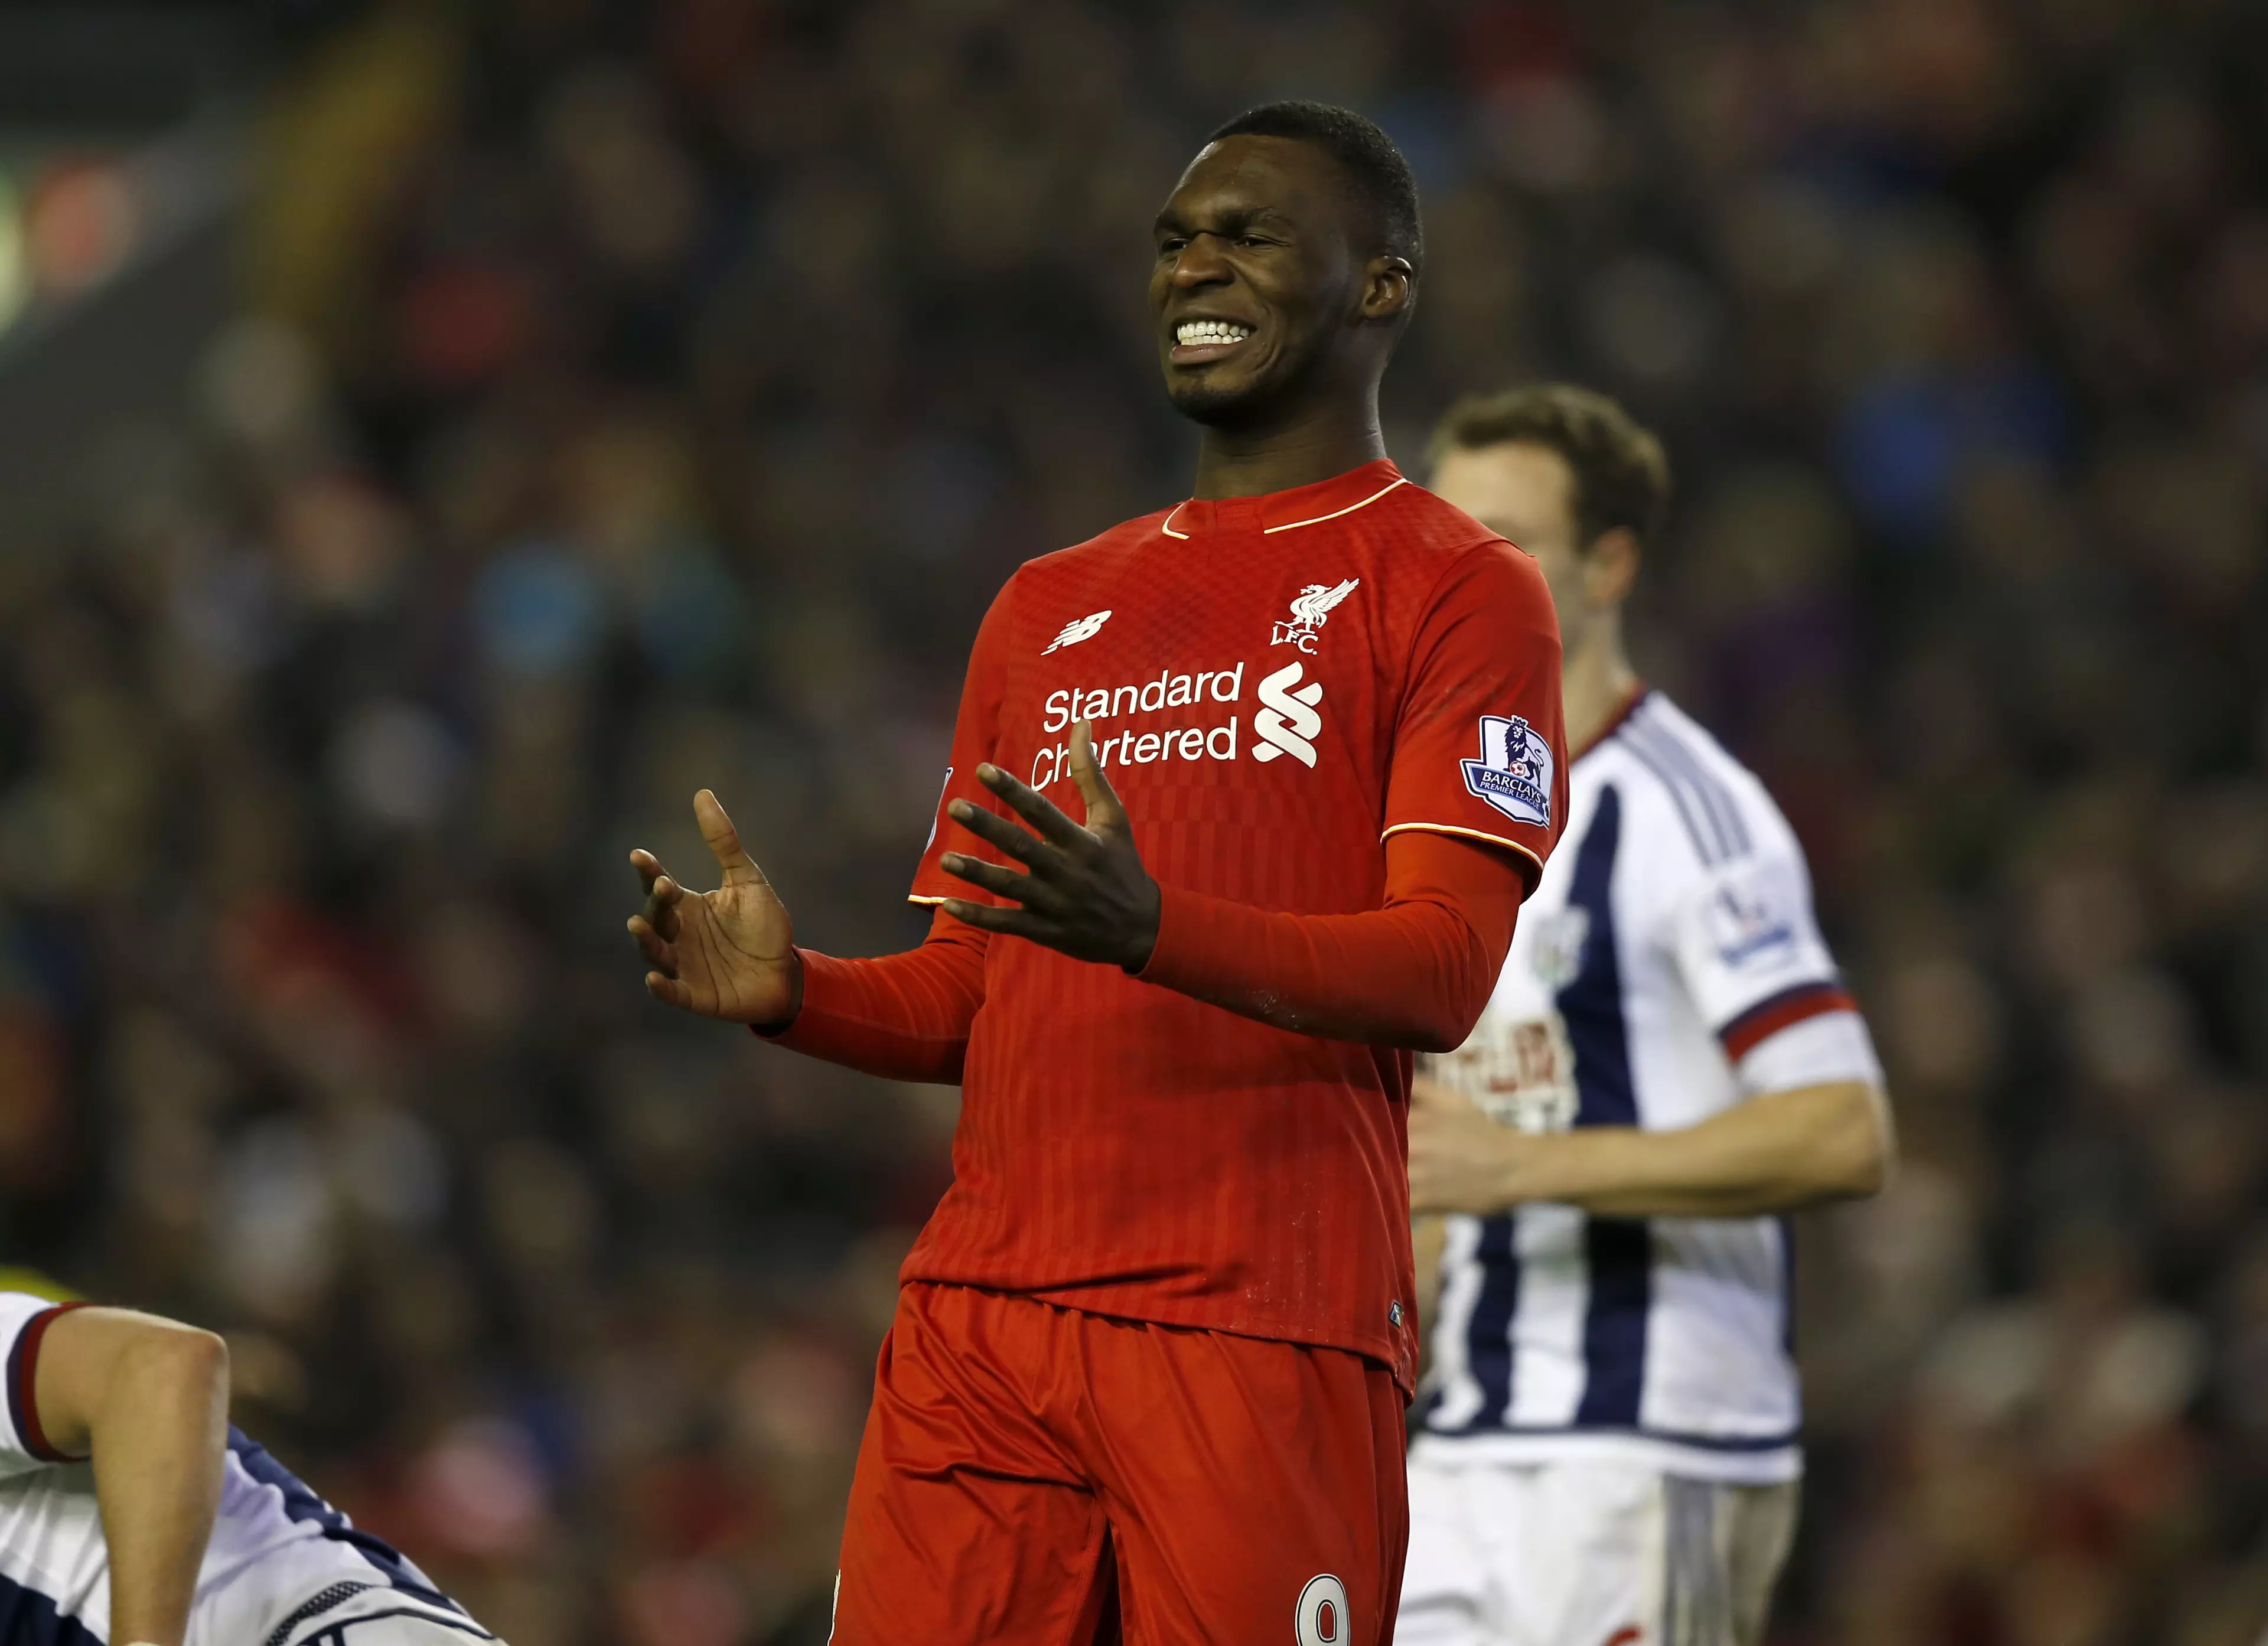 Christian Benteke only had a season at Liverpool after his £32.5million move from Aston Villa in 2015